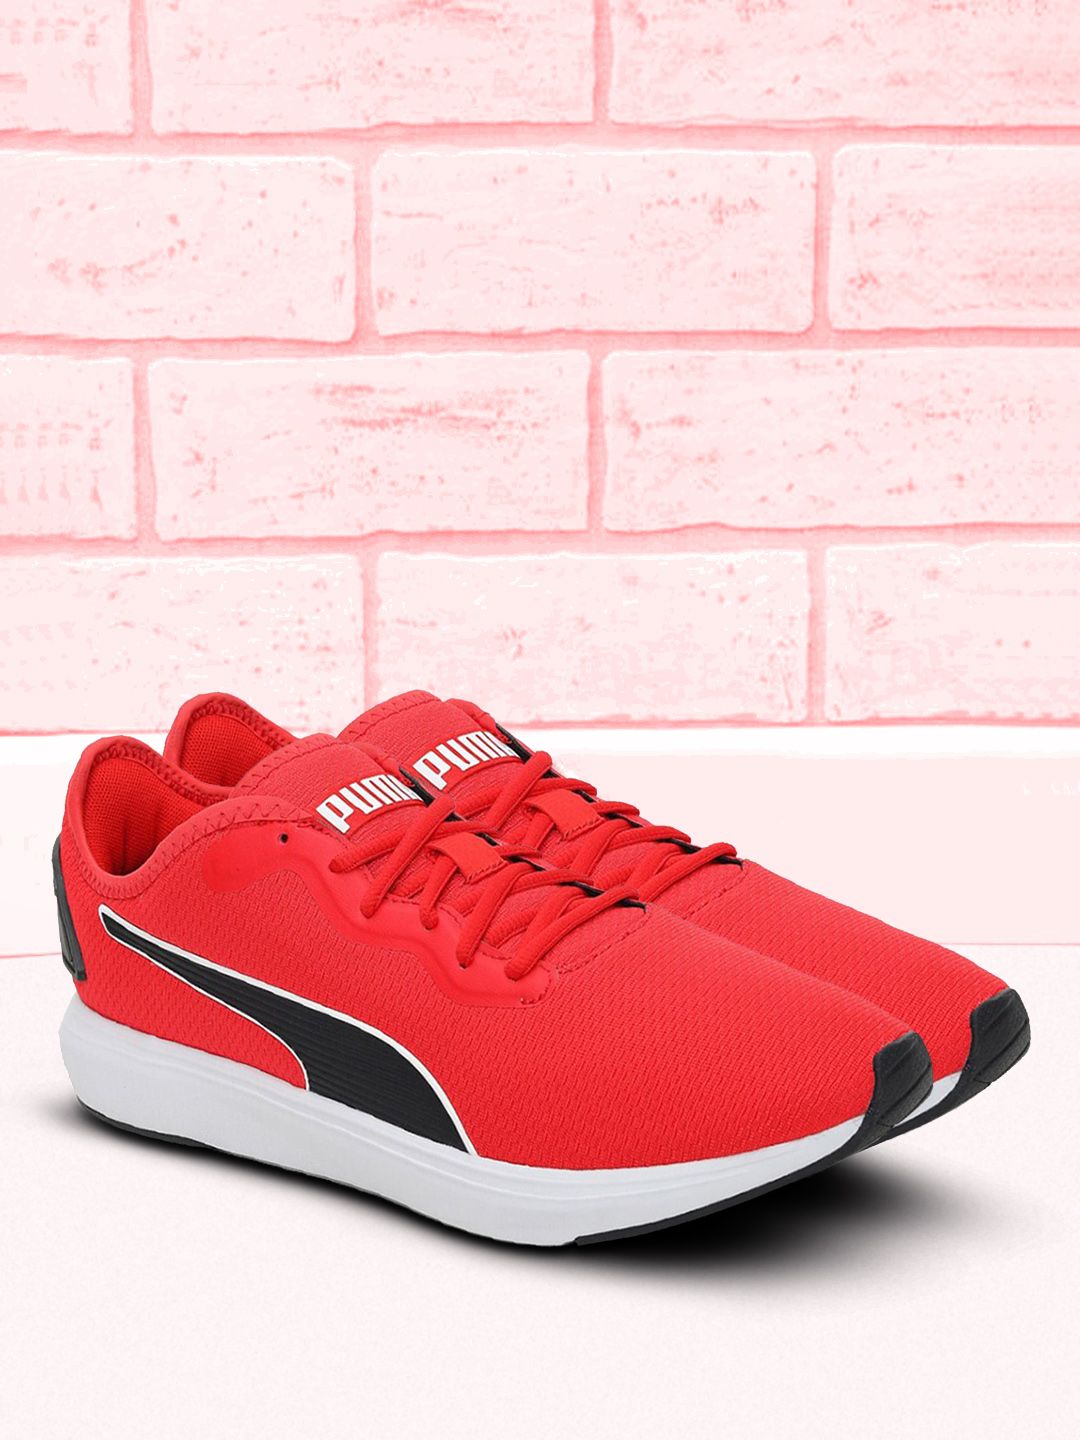 Puma Unisex Red Softride Cruise Bold Walking Shoes Price in India